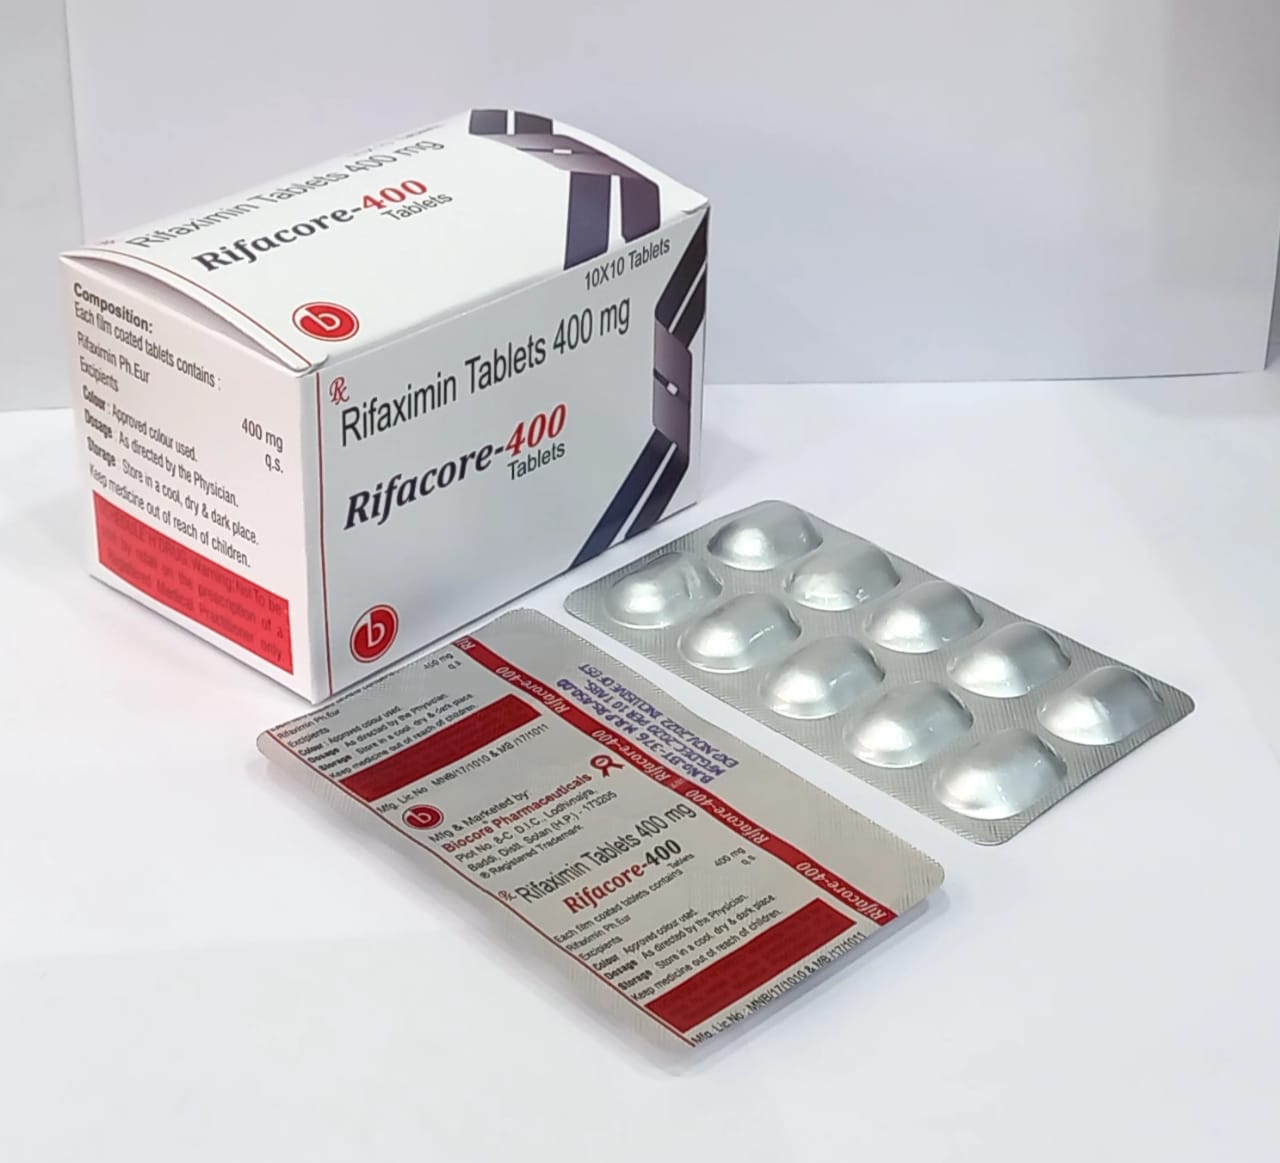 RIFACOR-400 Tablets